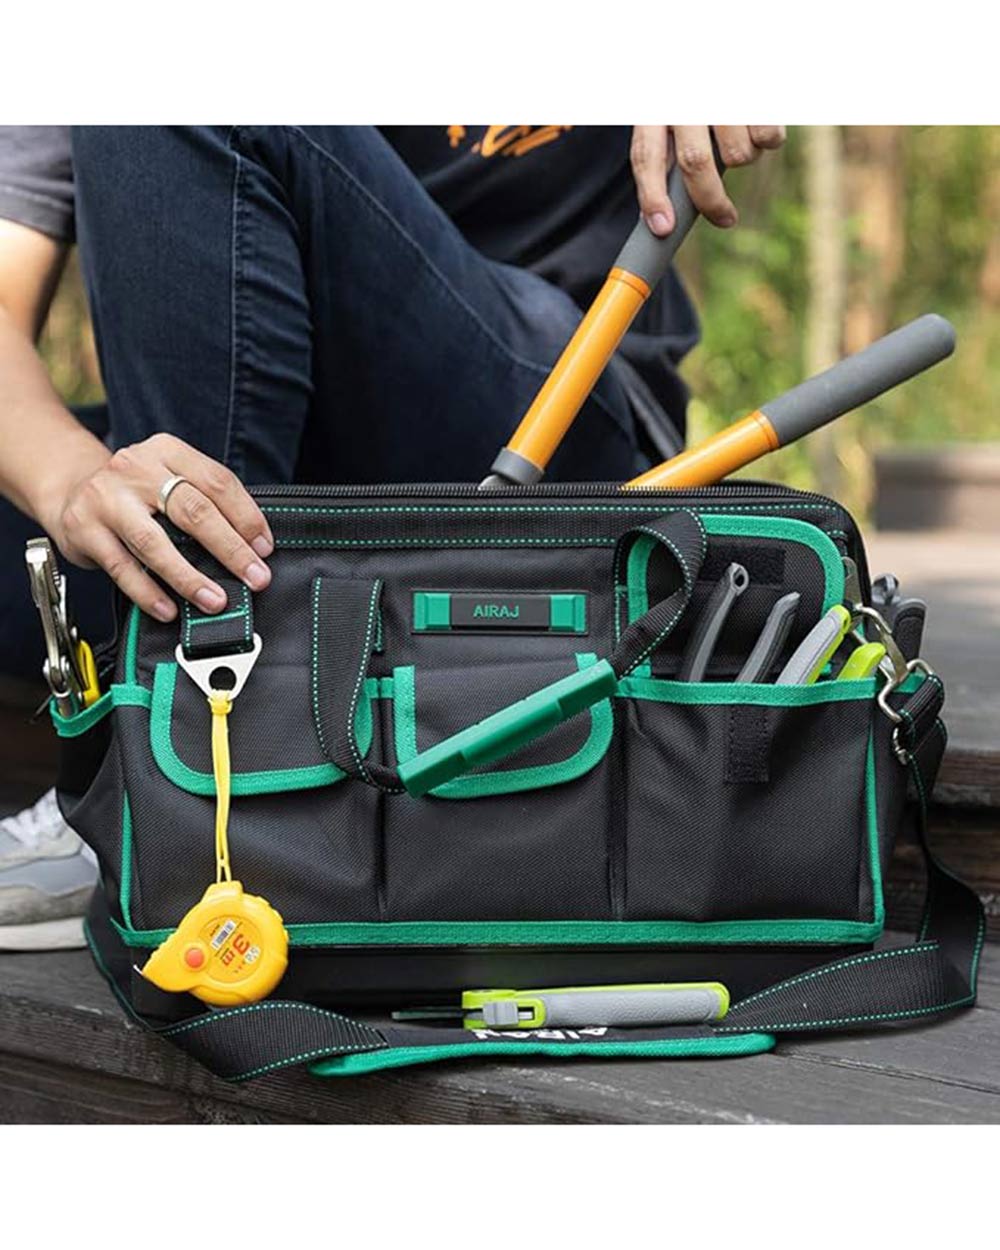 A lifestyle image of a gentleman using this fabric tool bag